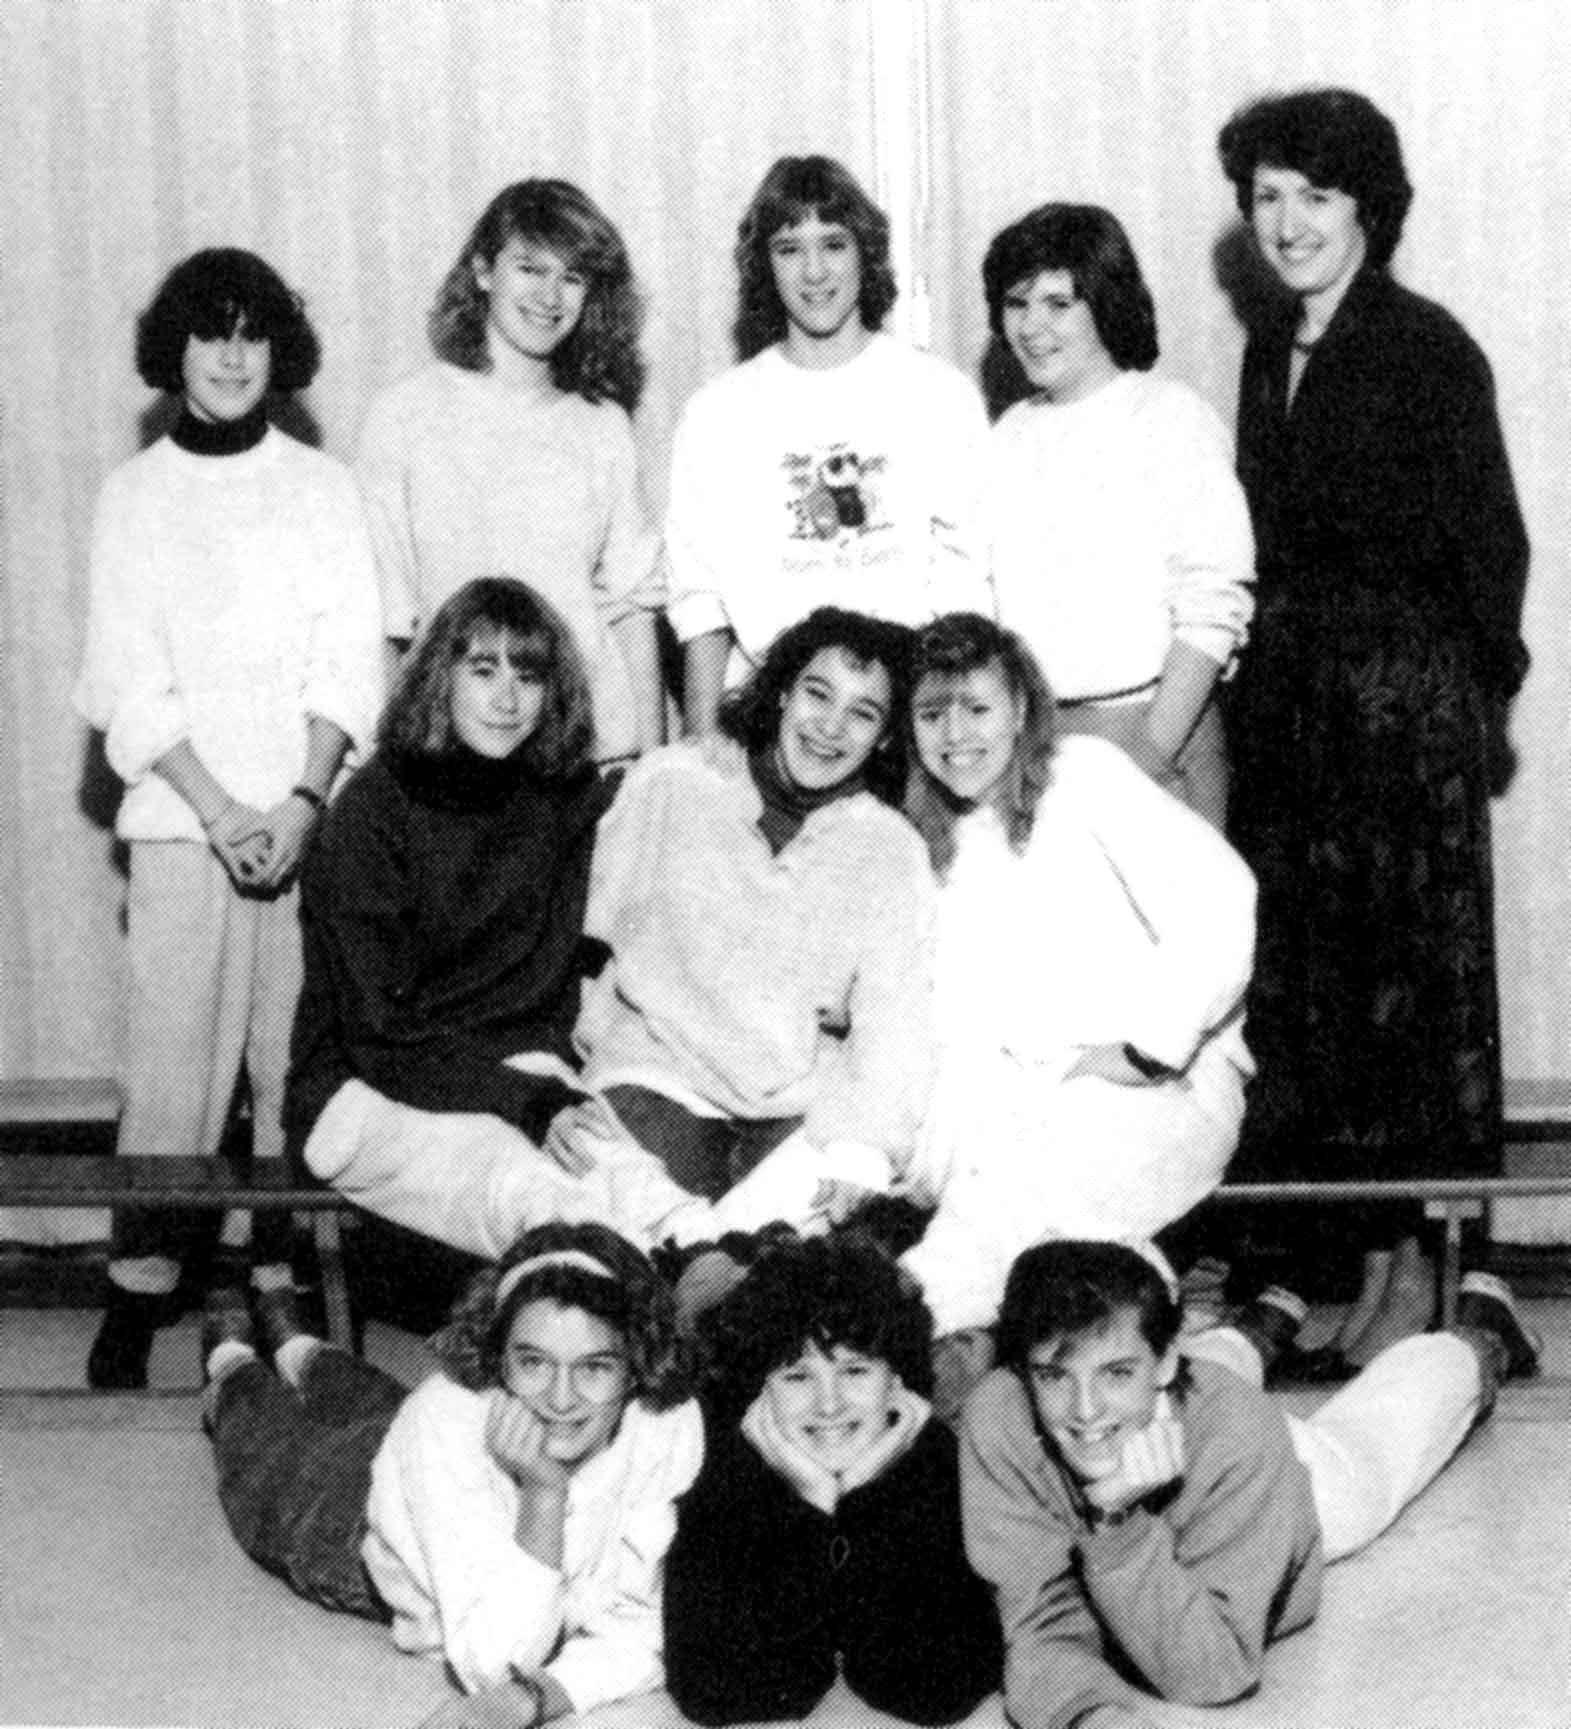 (Click to magnify) FRONT ROW: Karen Winterstein, Tawn Elliot, Lisa Cornell; ***SECOND ROW: Jocelyn Connell, Rebecca Harding, Stephanie Wilson; ***BACK ROW: Logan O'Connor (manager), Jennifer Prentice, Cindy Risebrough, Bonnie Long, Ms. K. MacDonald (Coach